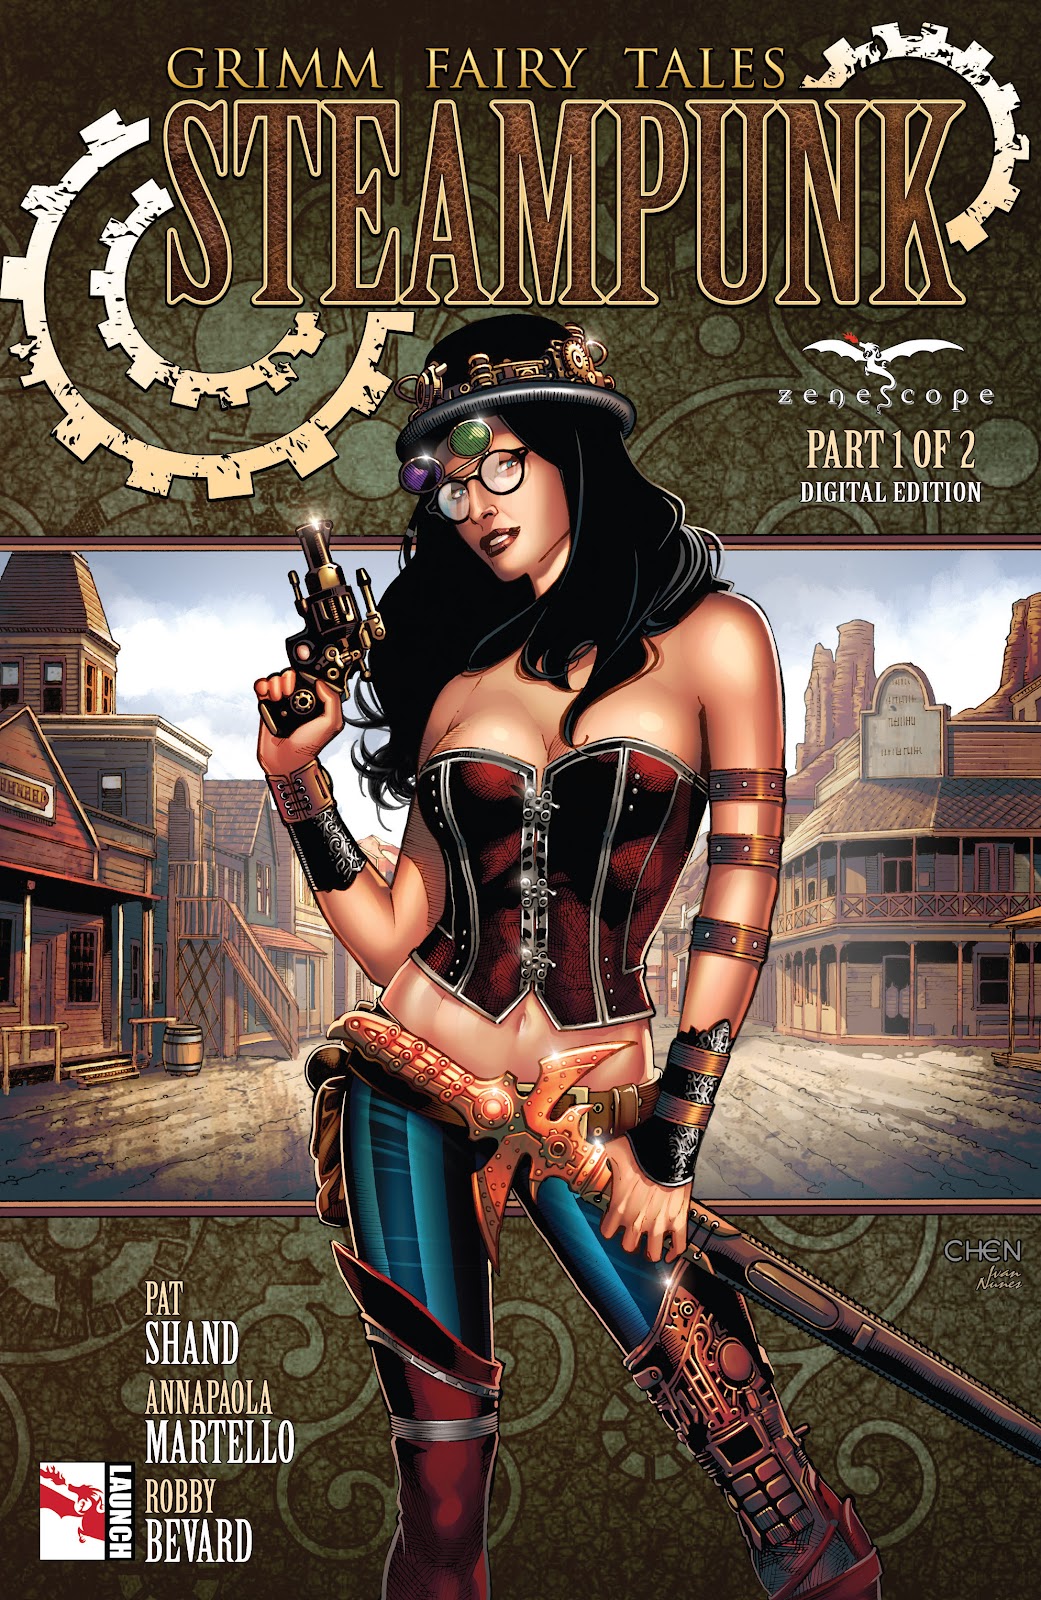 Grimm Fairy Tales Steampunk issue 1 - Page 1